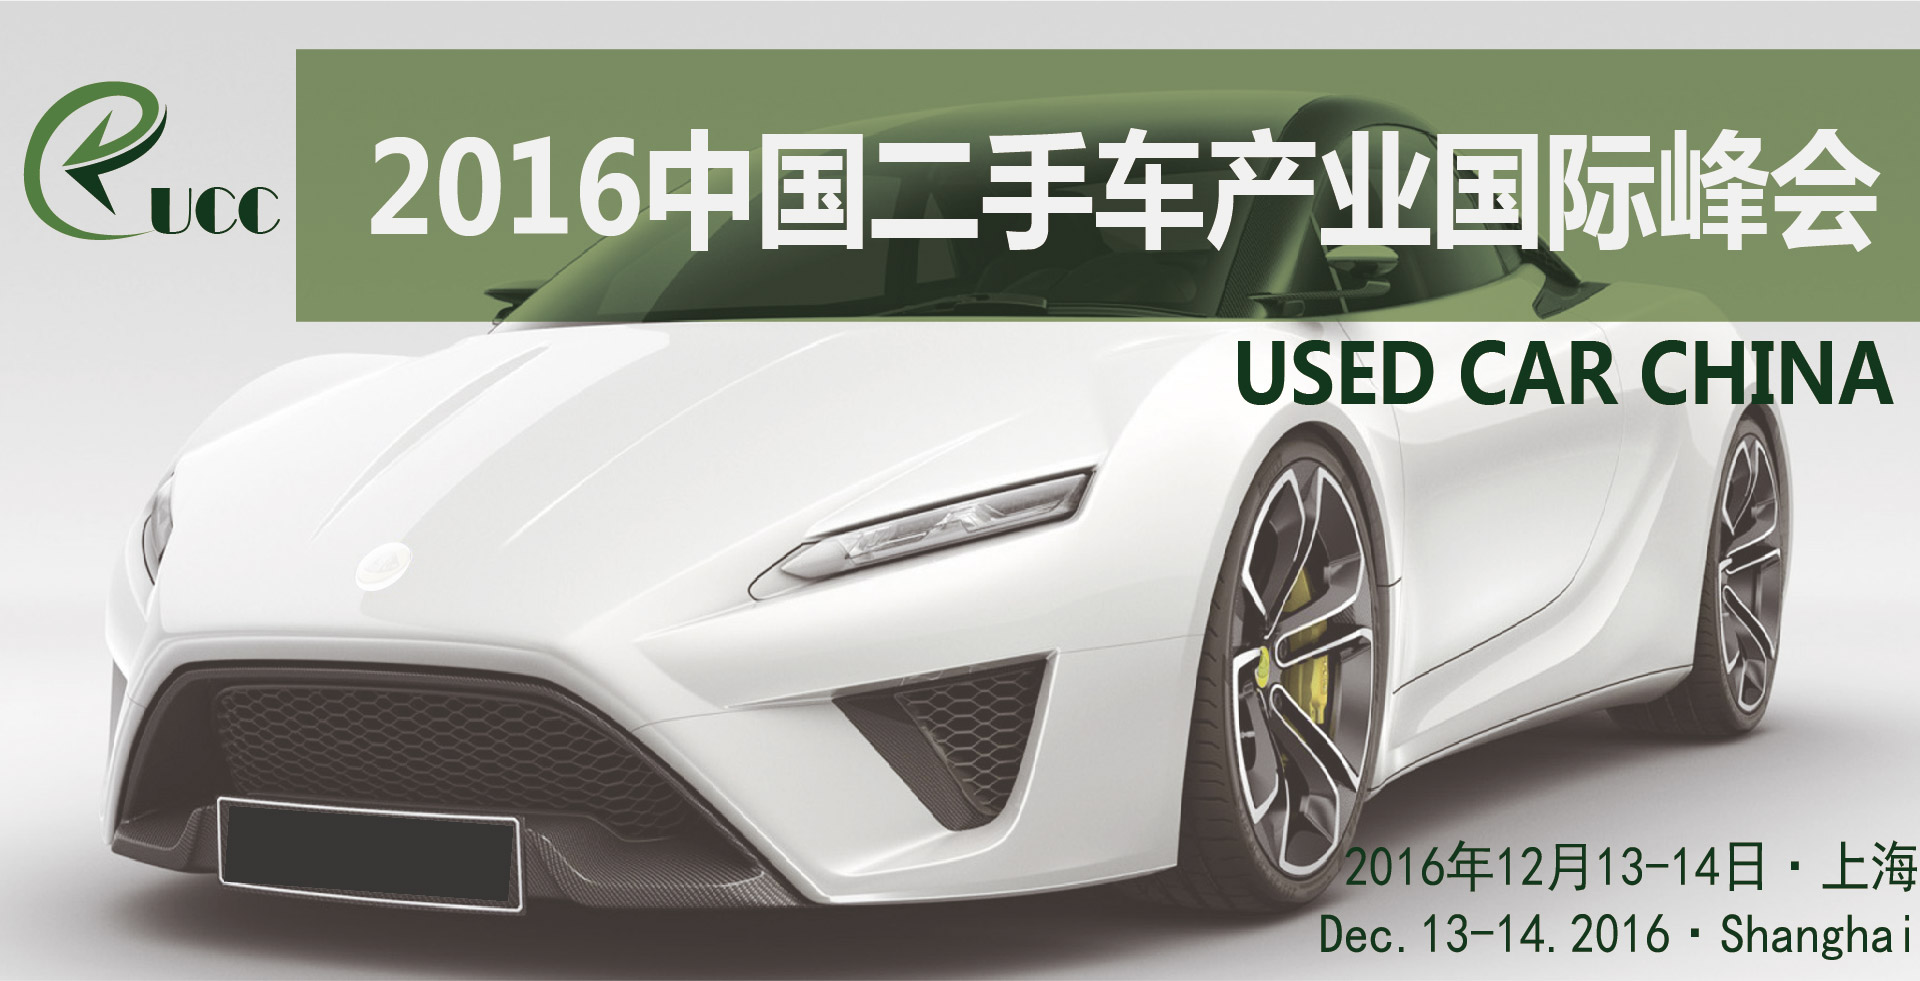 （End）USED CAR CHINA 2016